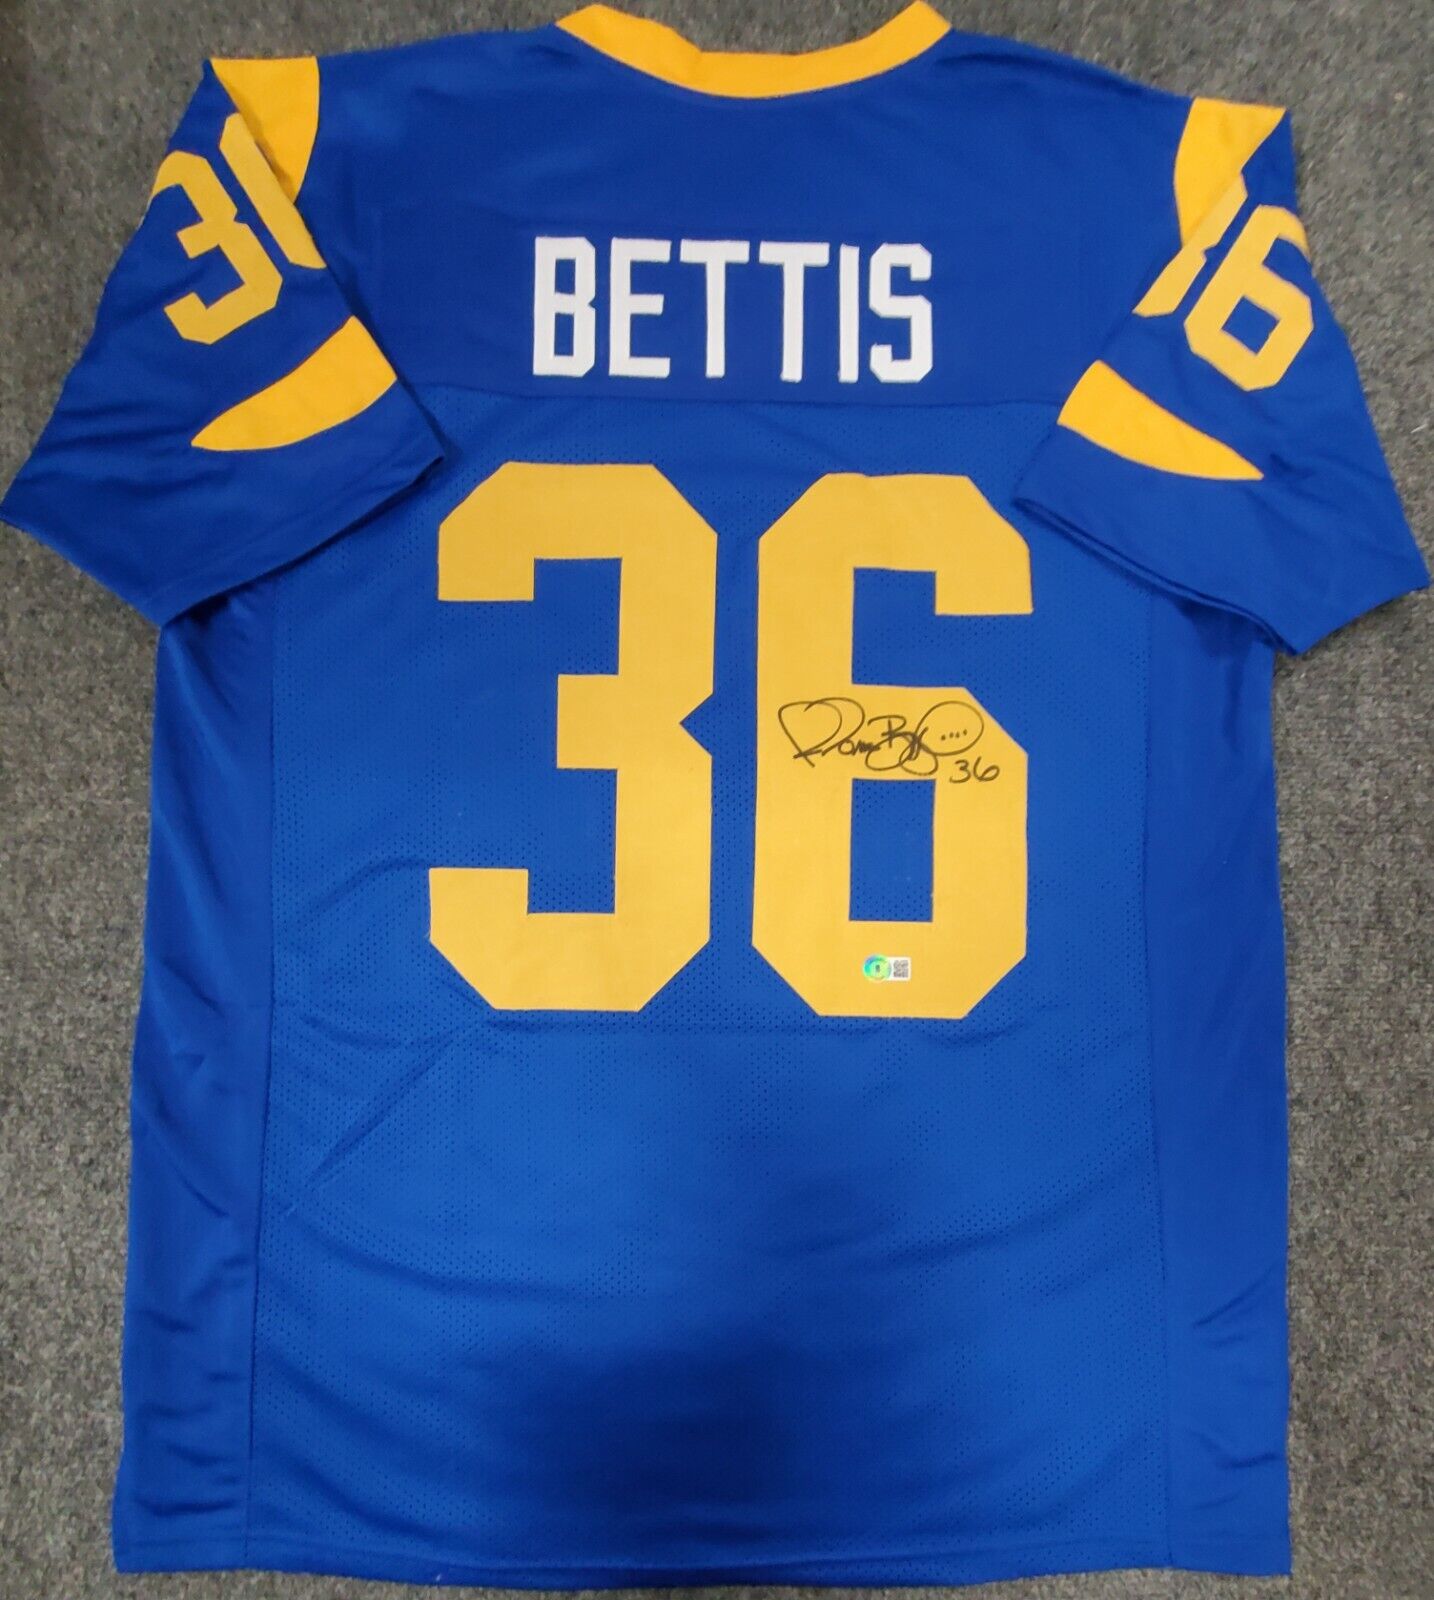 Jerome Bettis Autographed Jerseys, Signed Jerome Bettis Inscripted